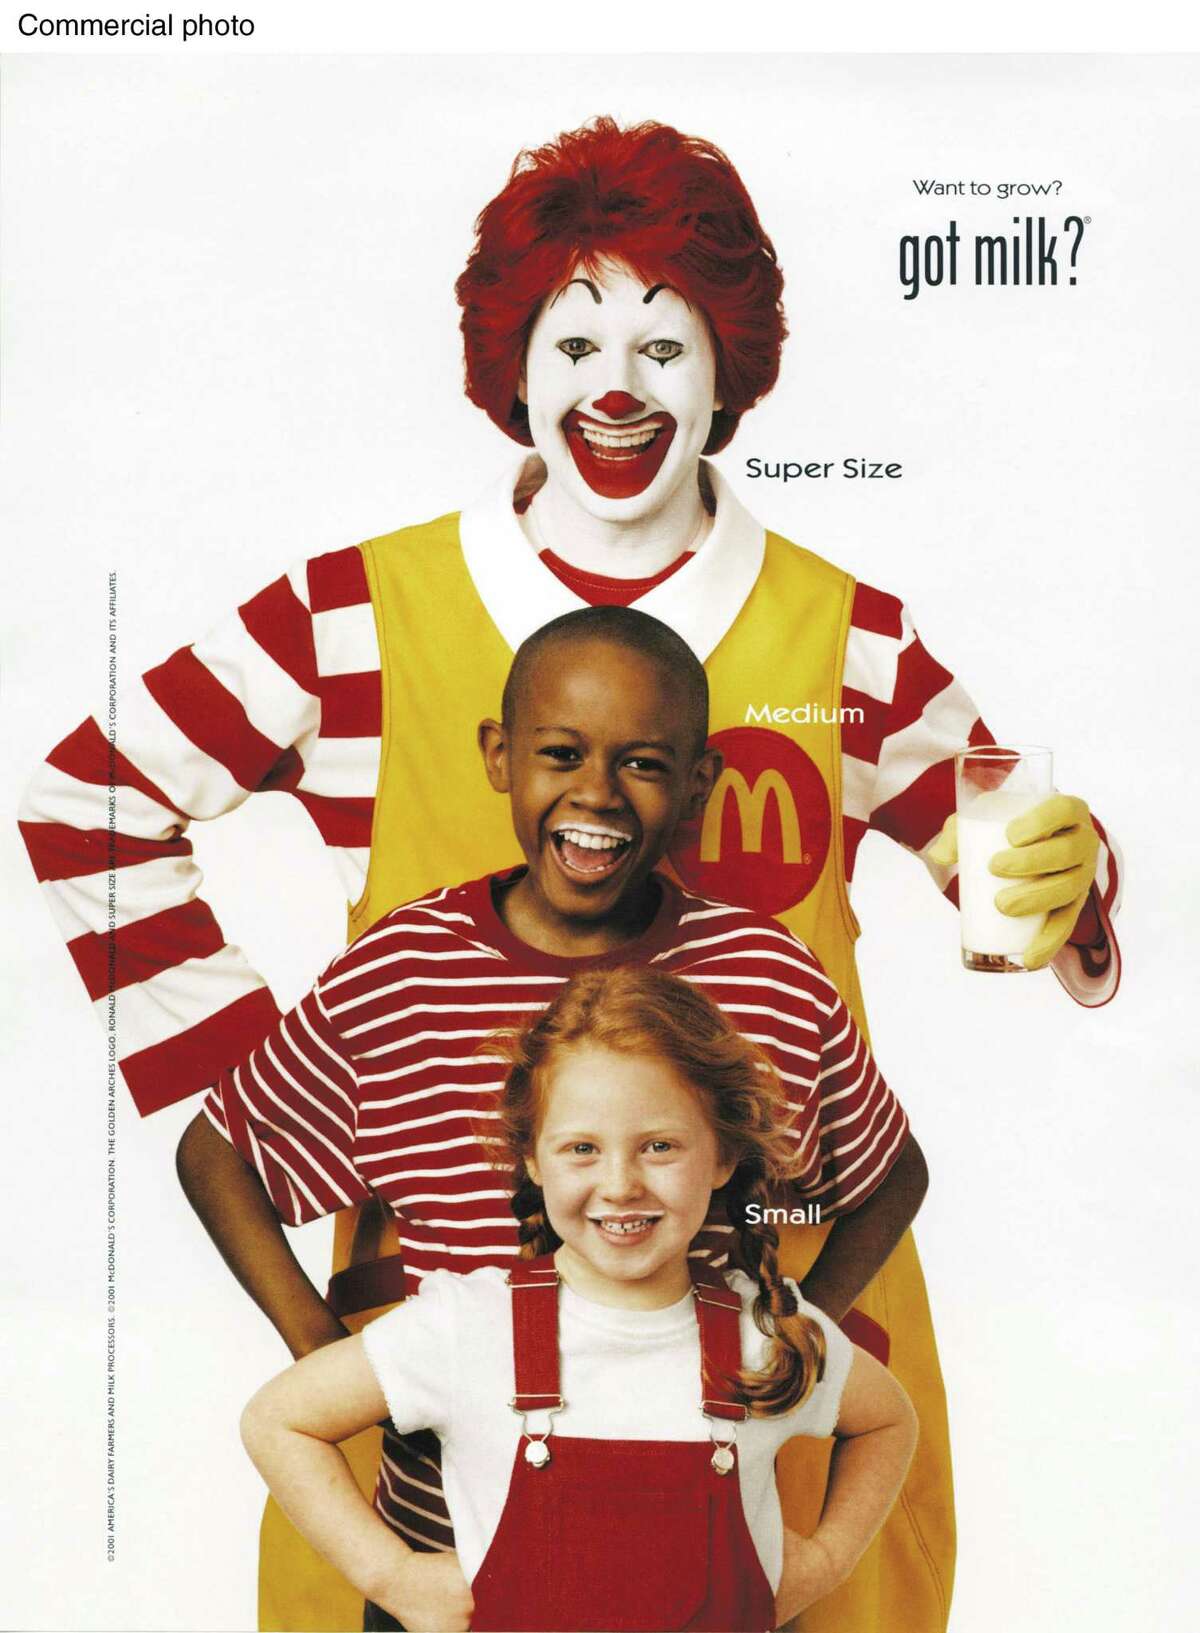 For the first national ads, Scott was dropped because the agency thought he was too heavy to play the part of an "extremely active" Ronald, according to the book "McDonald's: Behind the Arches."